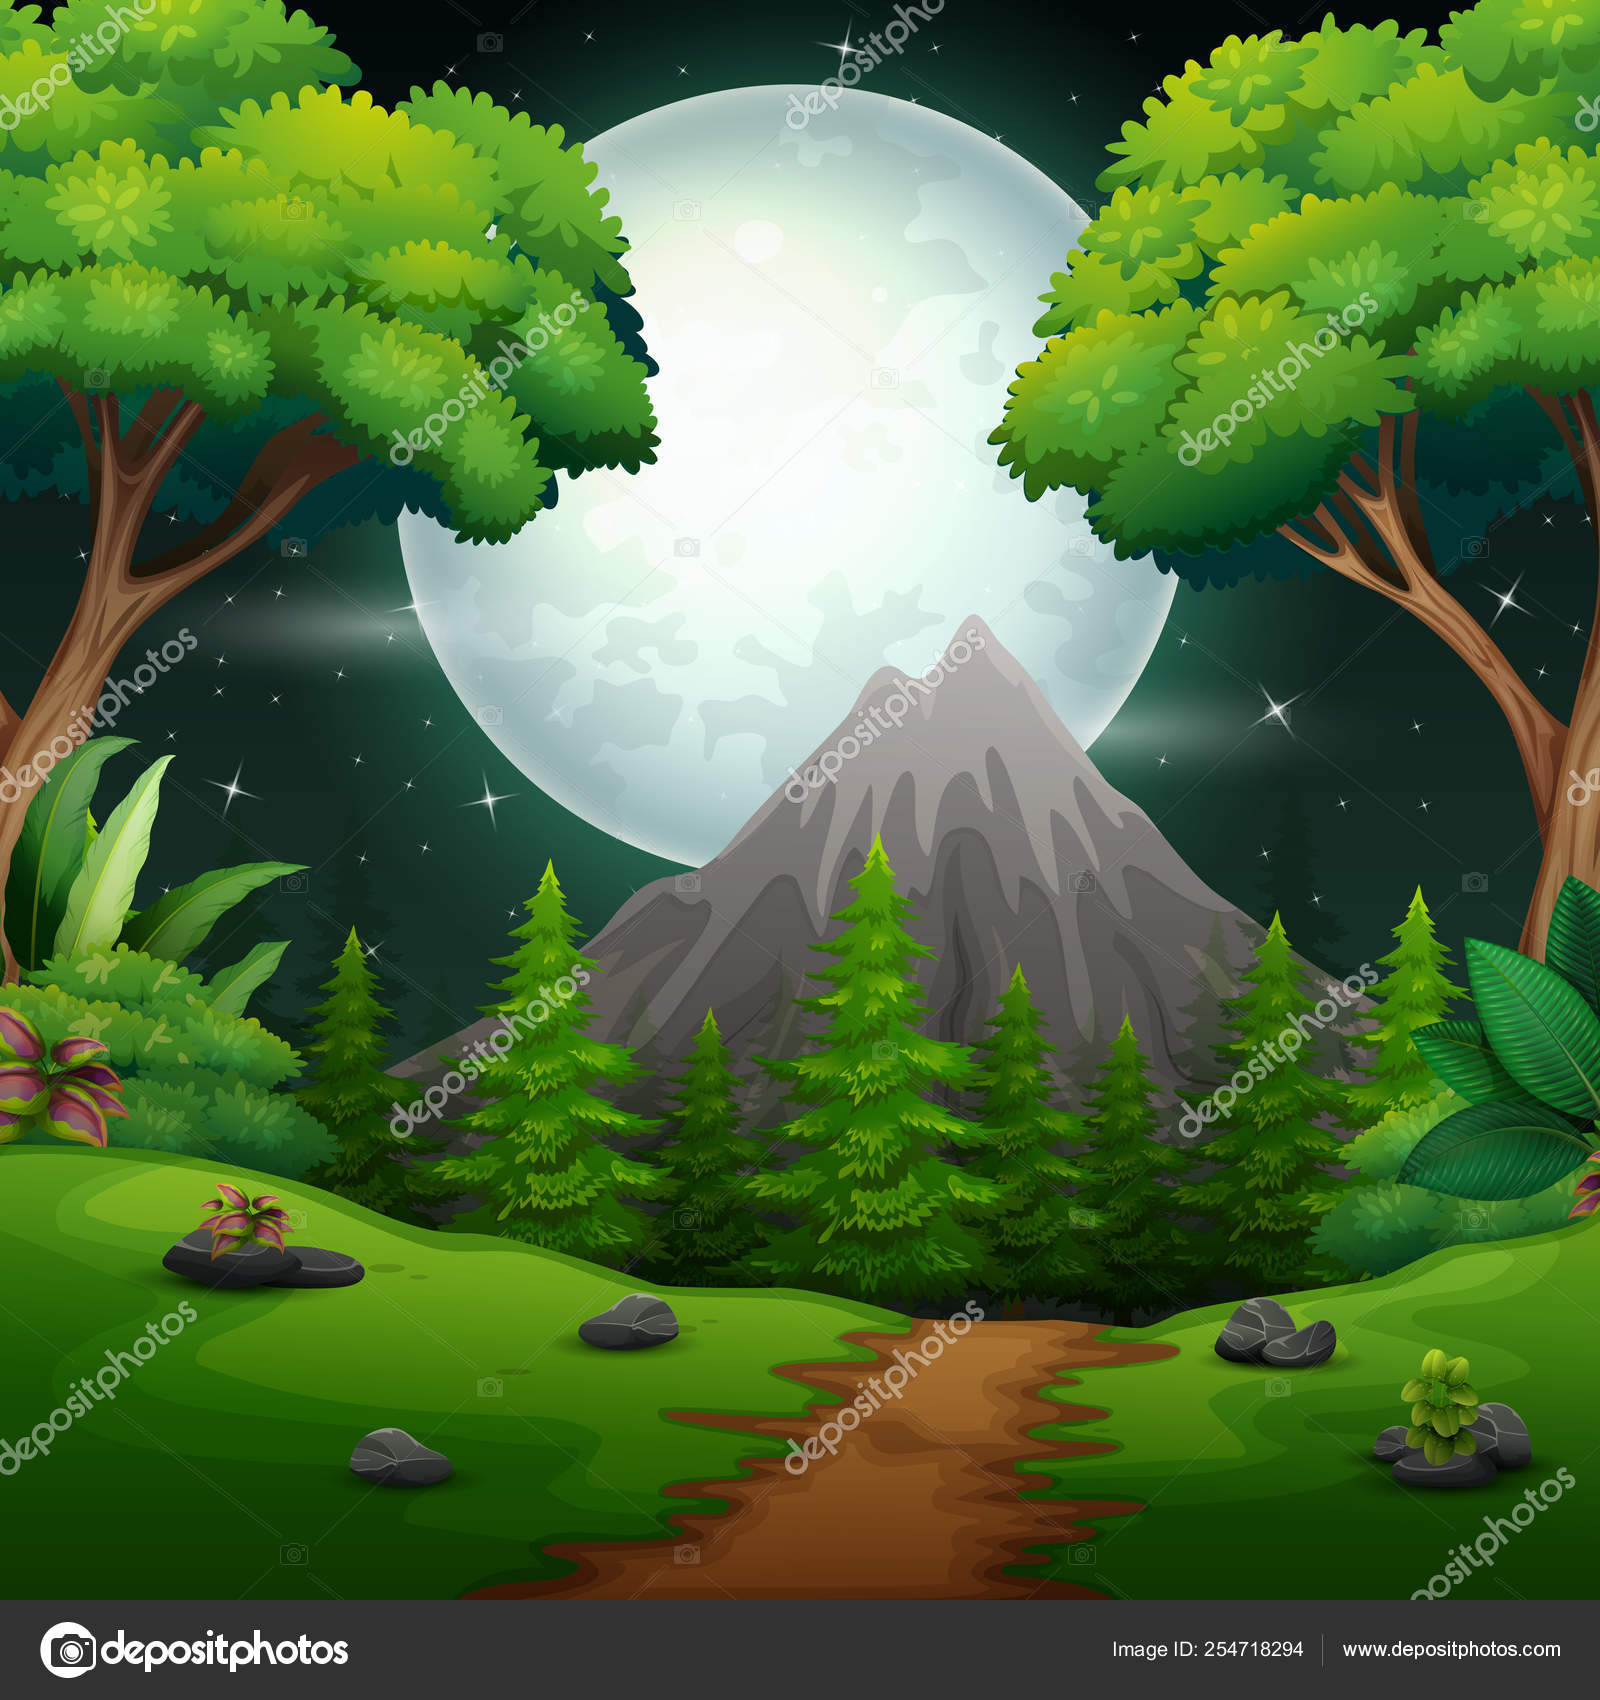 Night time sky nature landscape with moon Vector Image